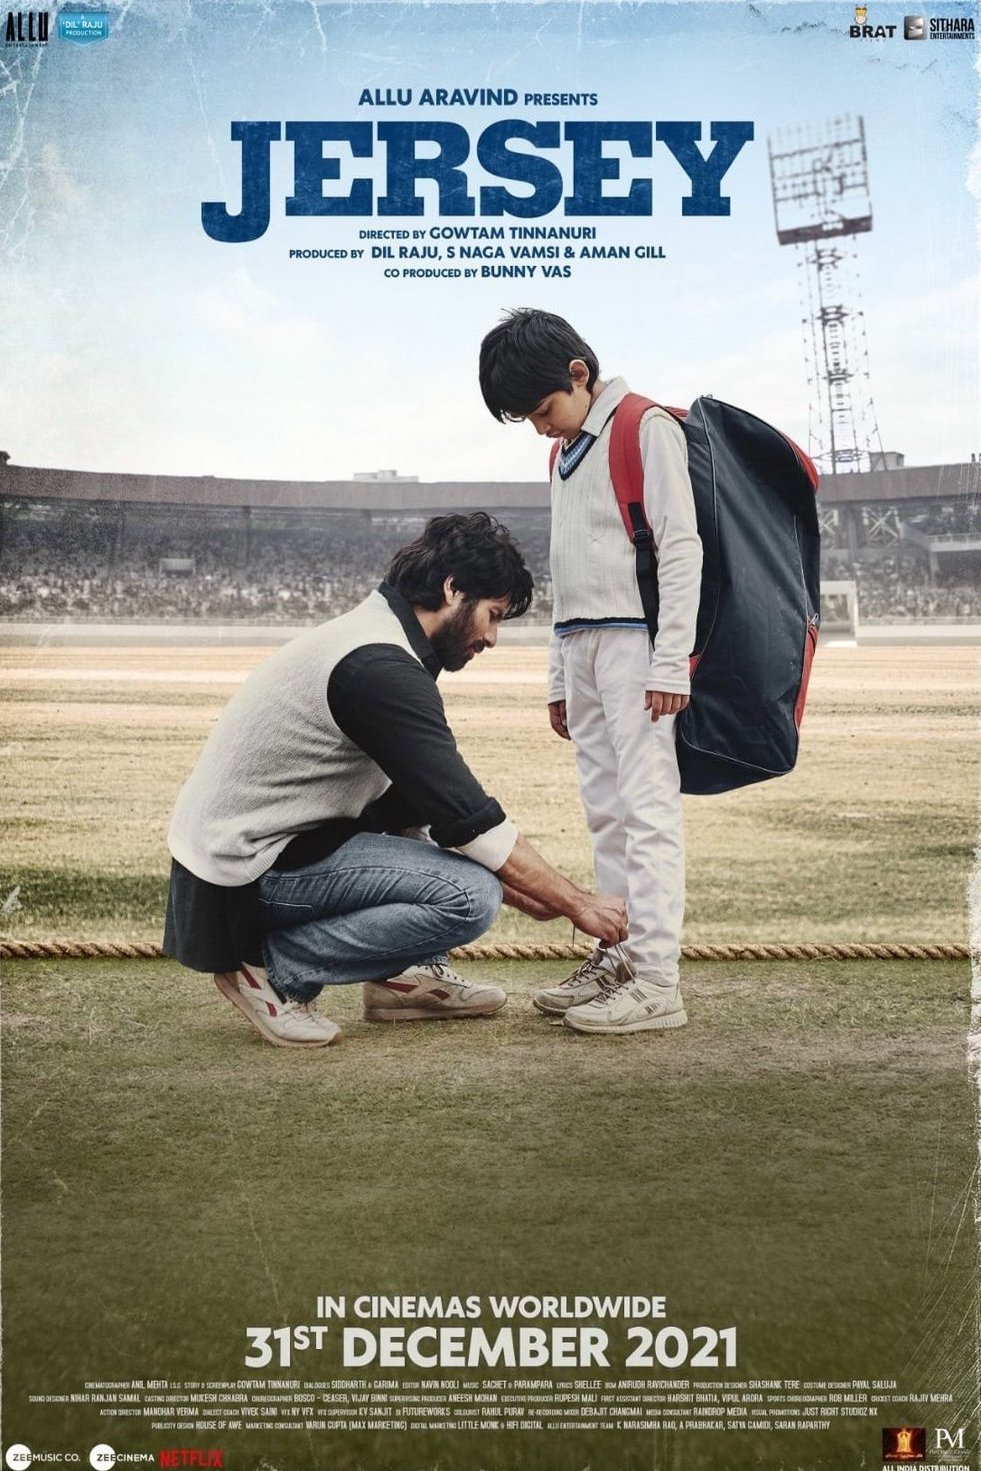 Hindi poster of the movie Jersey